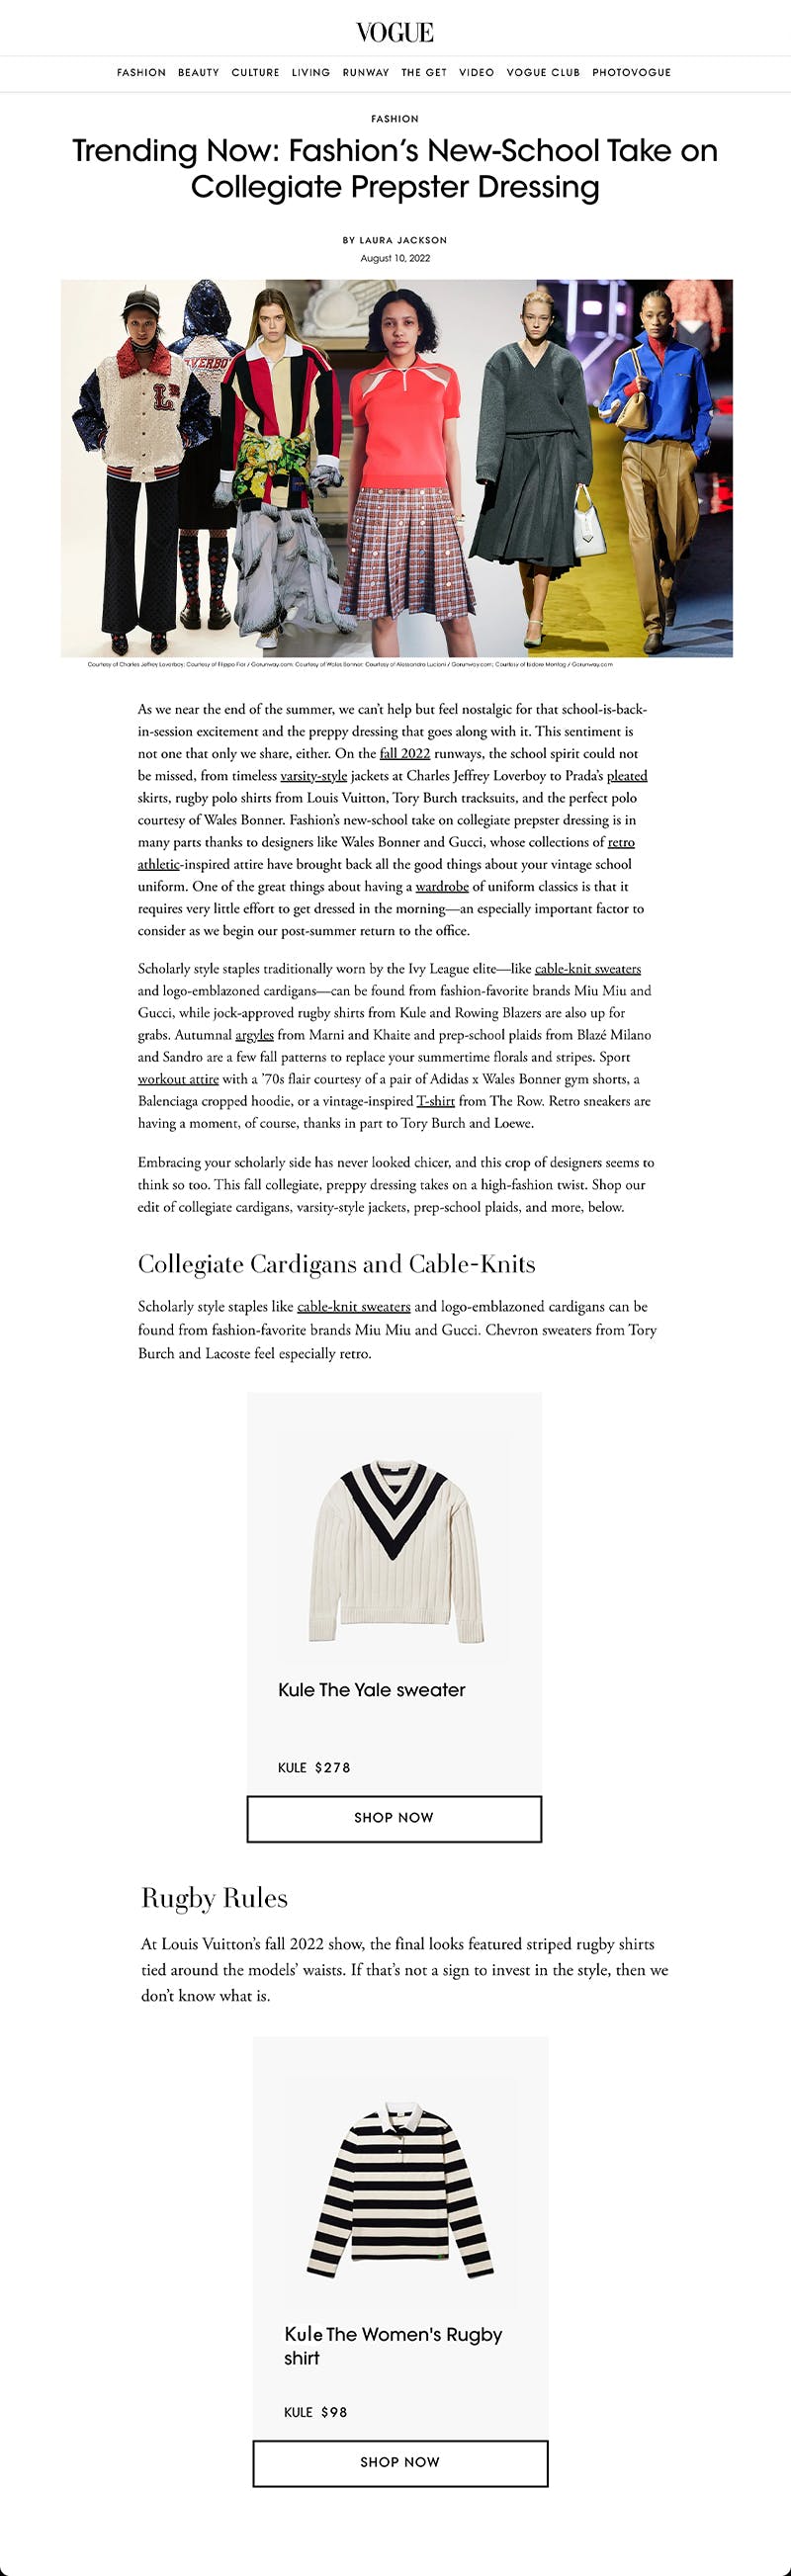 Vogue featuring KULE sweater and rugby for Collegiate Prepster Dressing